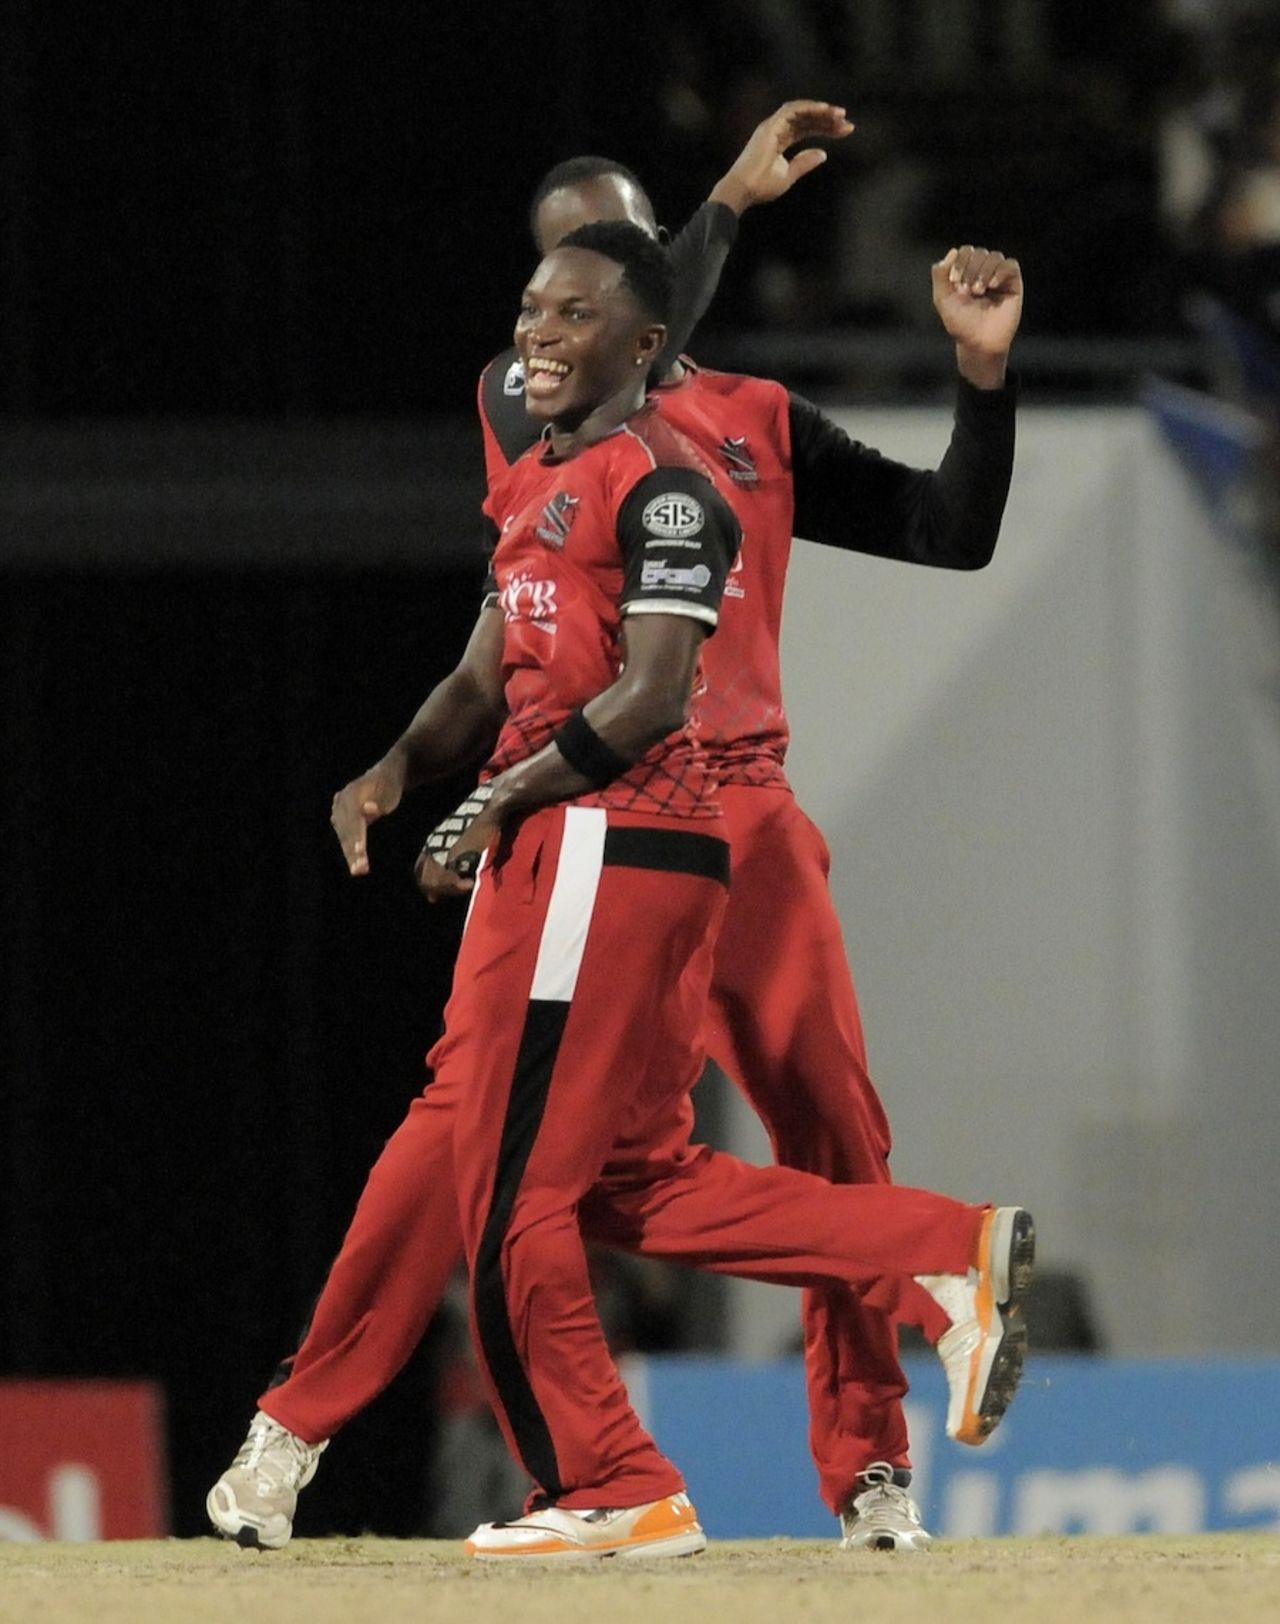 Fidel Edwards finished with 5 for 22, Barbados Tridents v Trinidad & Tobago Red Steel, Caribbean Premier League, Bridgetown, August 3, 2013